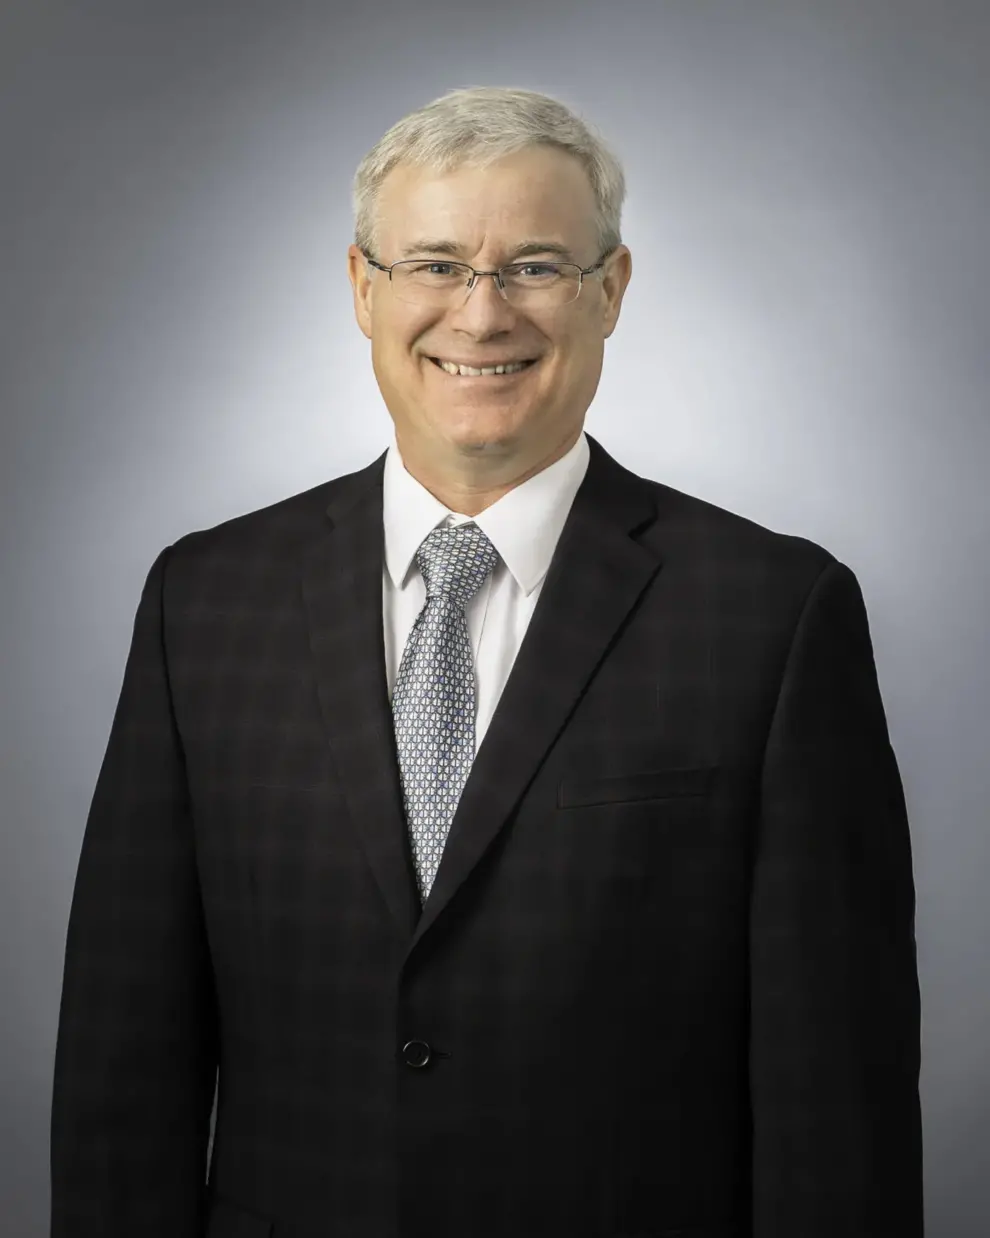 <strong>HNTB welcomes Richard Tetreault, a leading transportation infrastructure expert</strong>